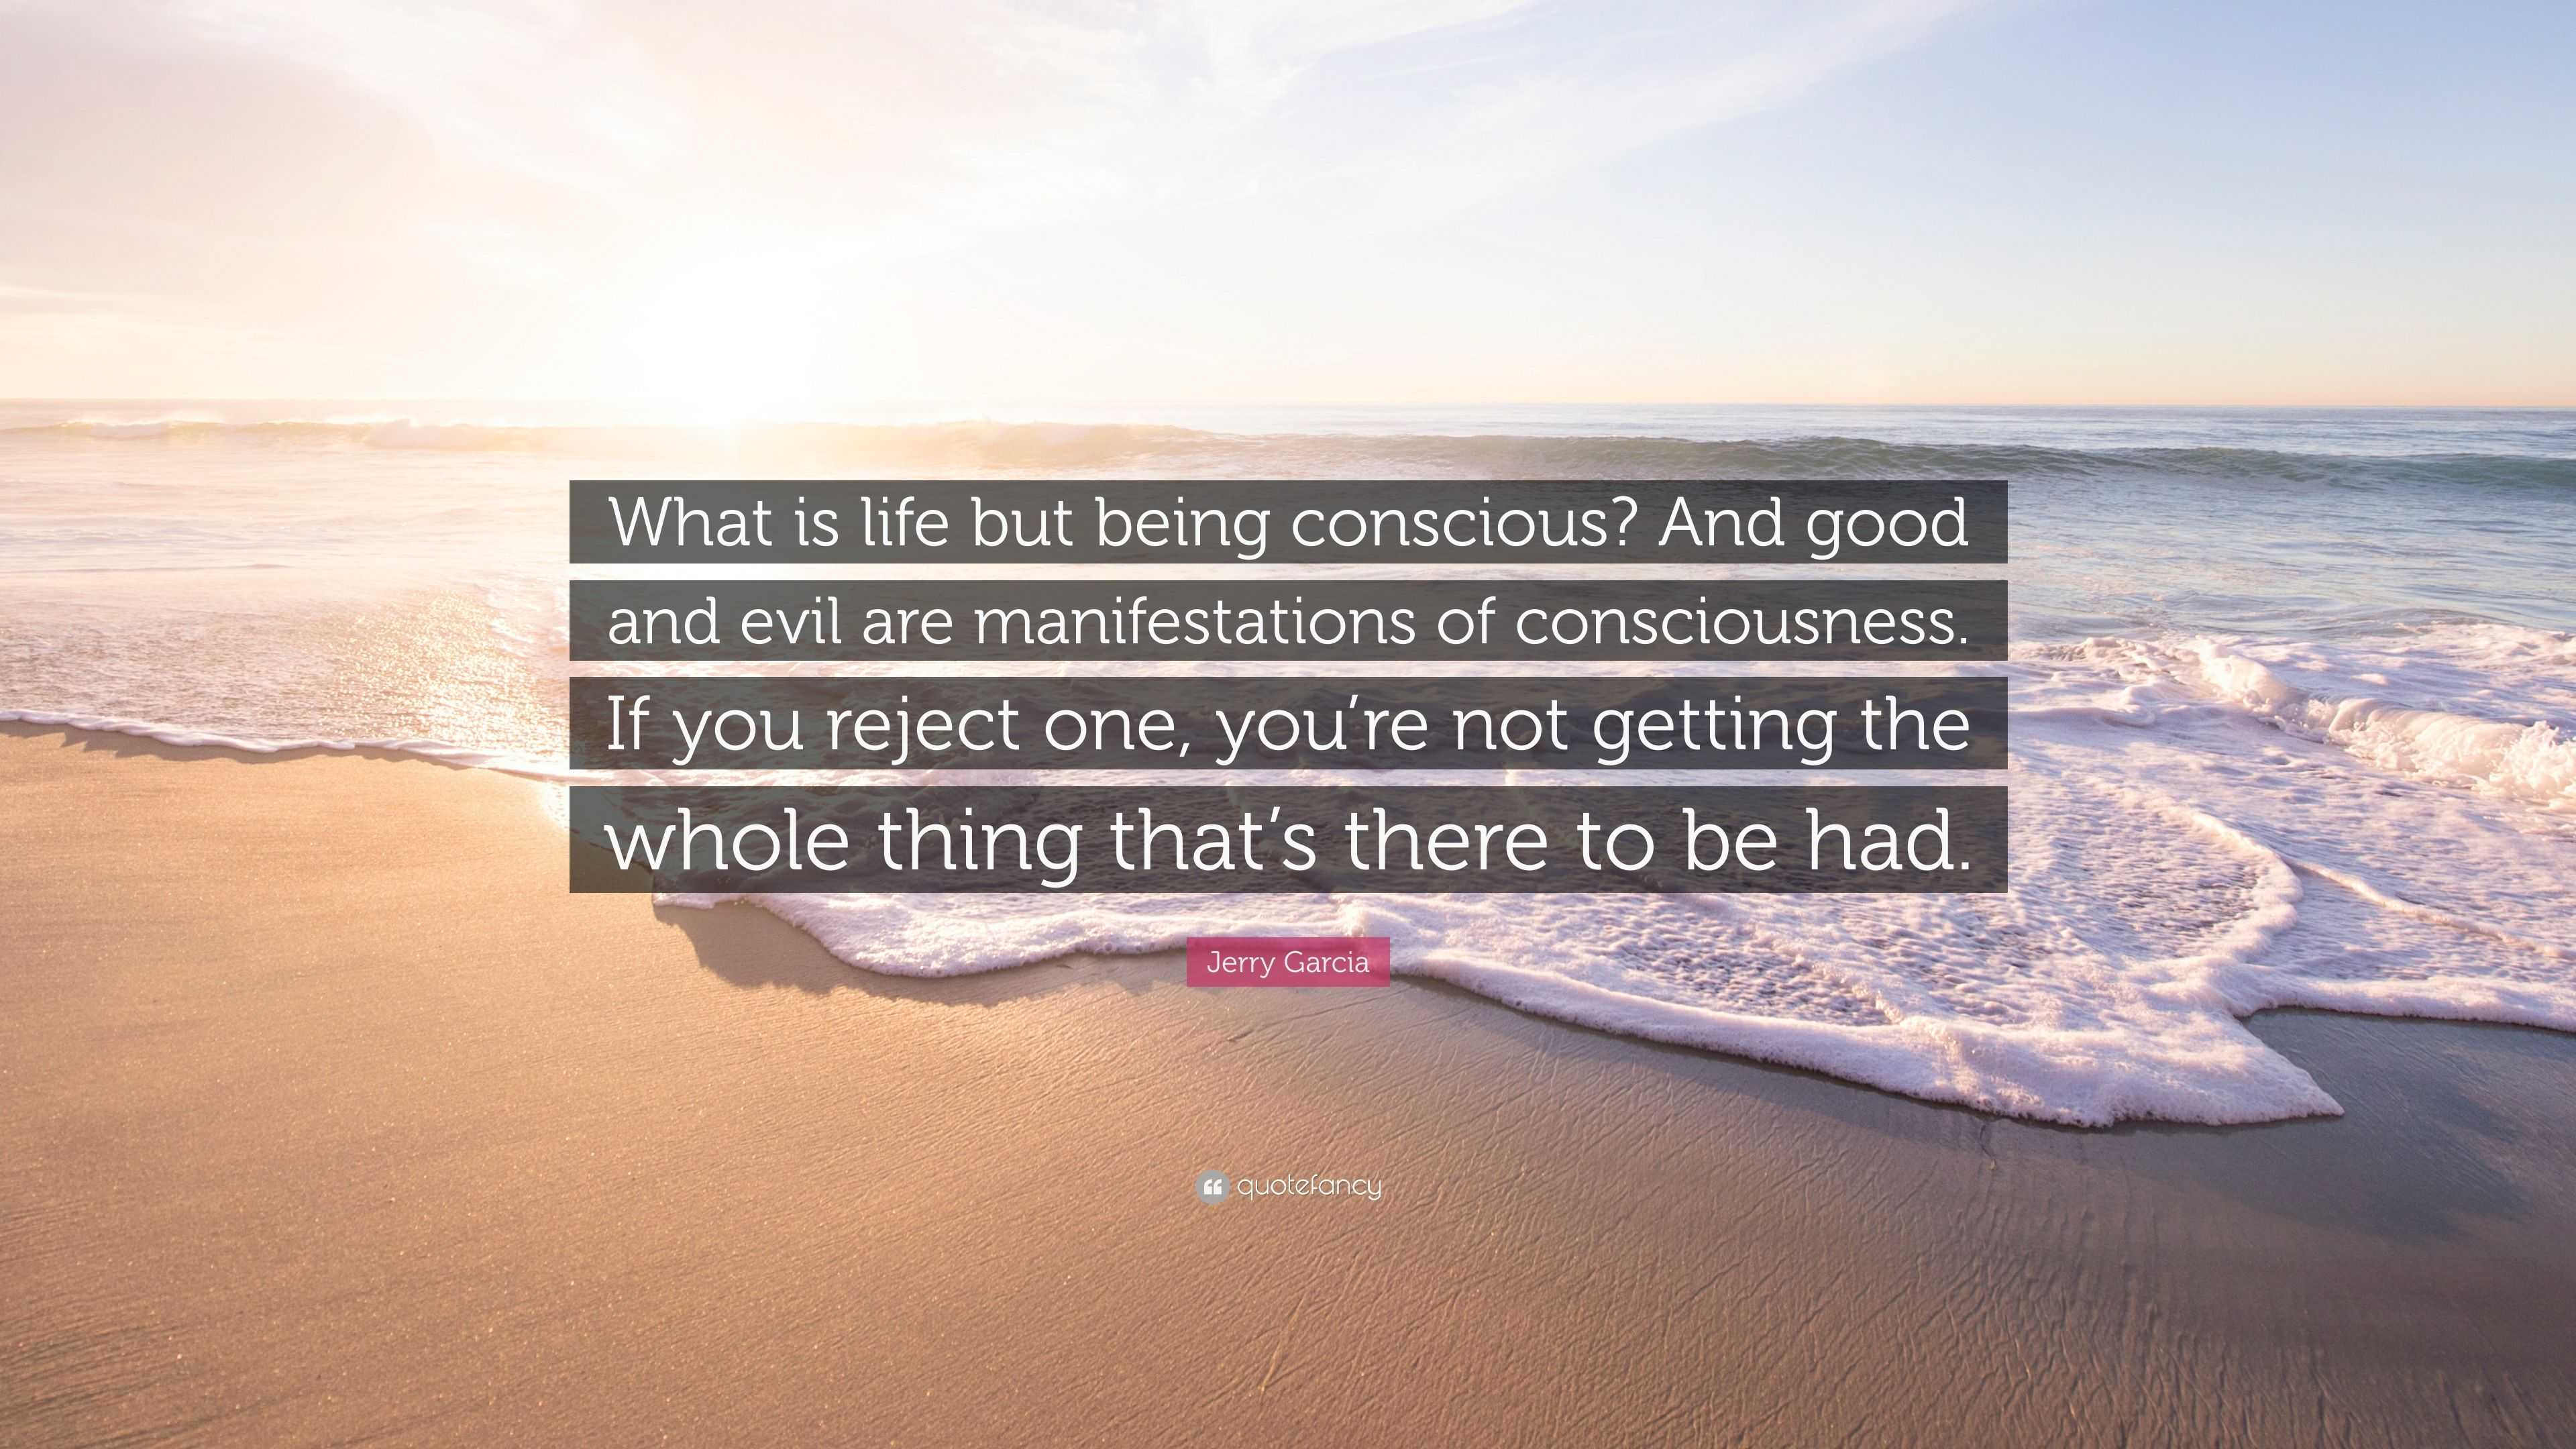 Jerry Garcia Quote “What is life but being conscious And good and evil